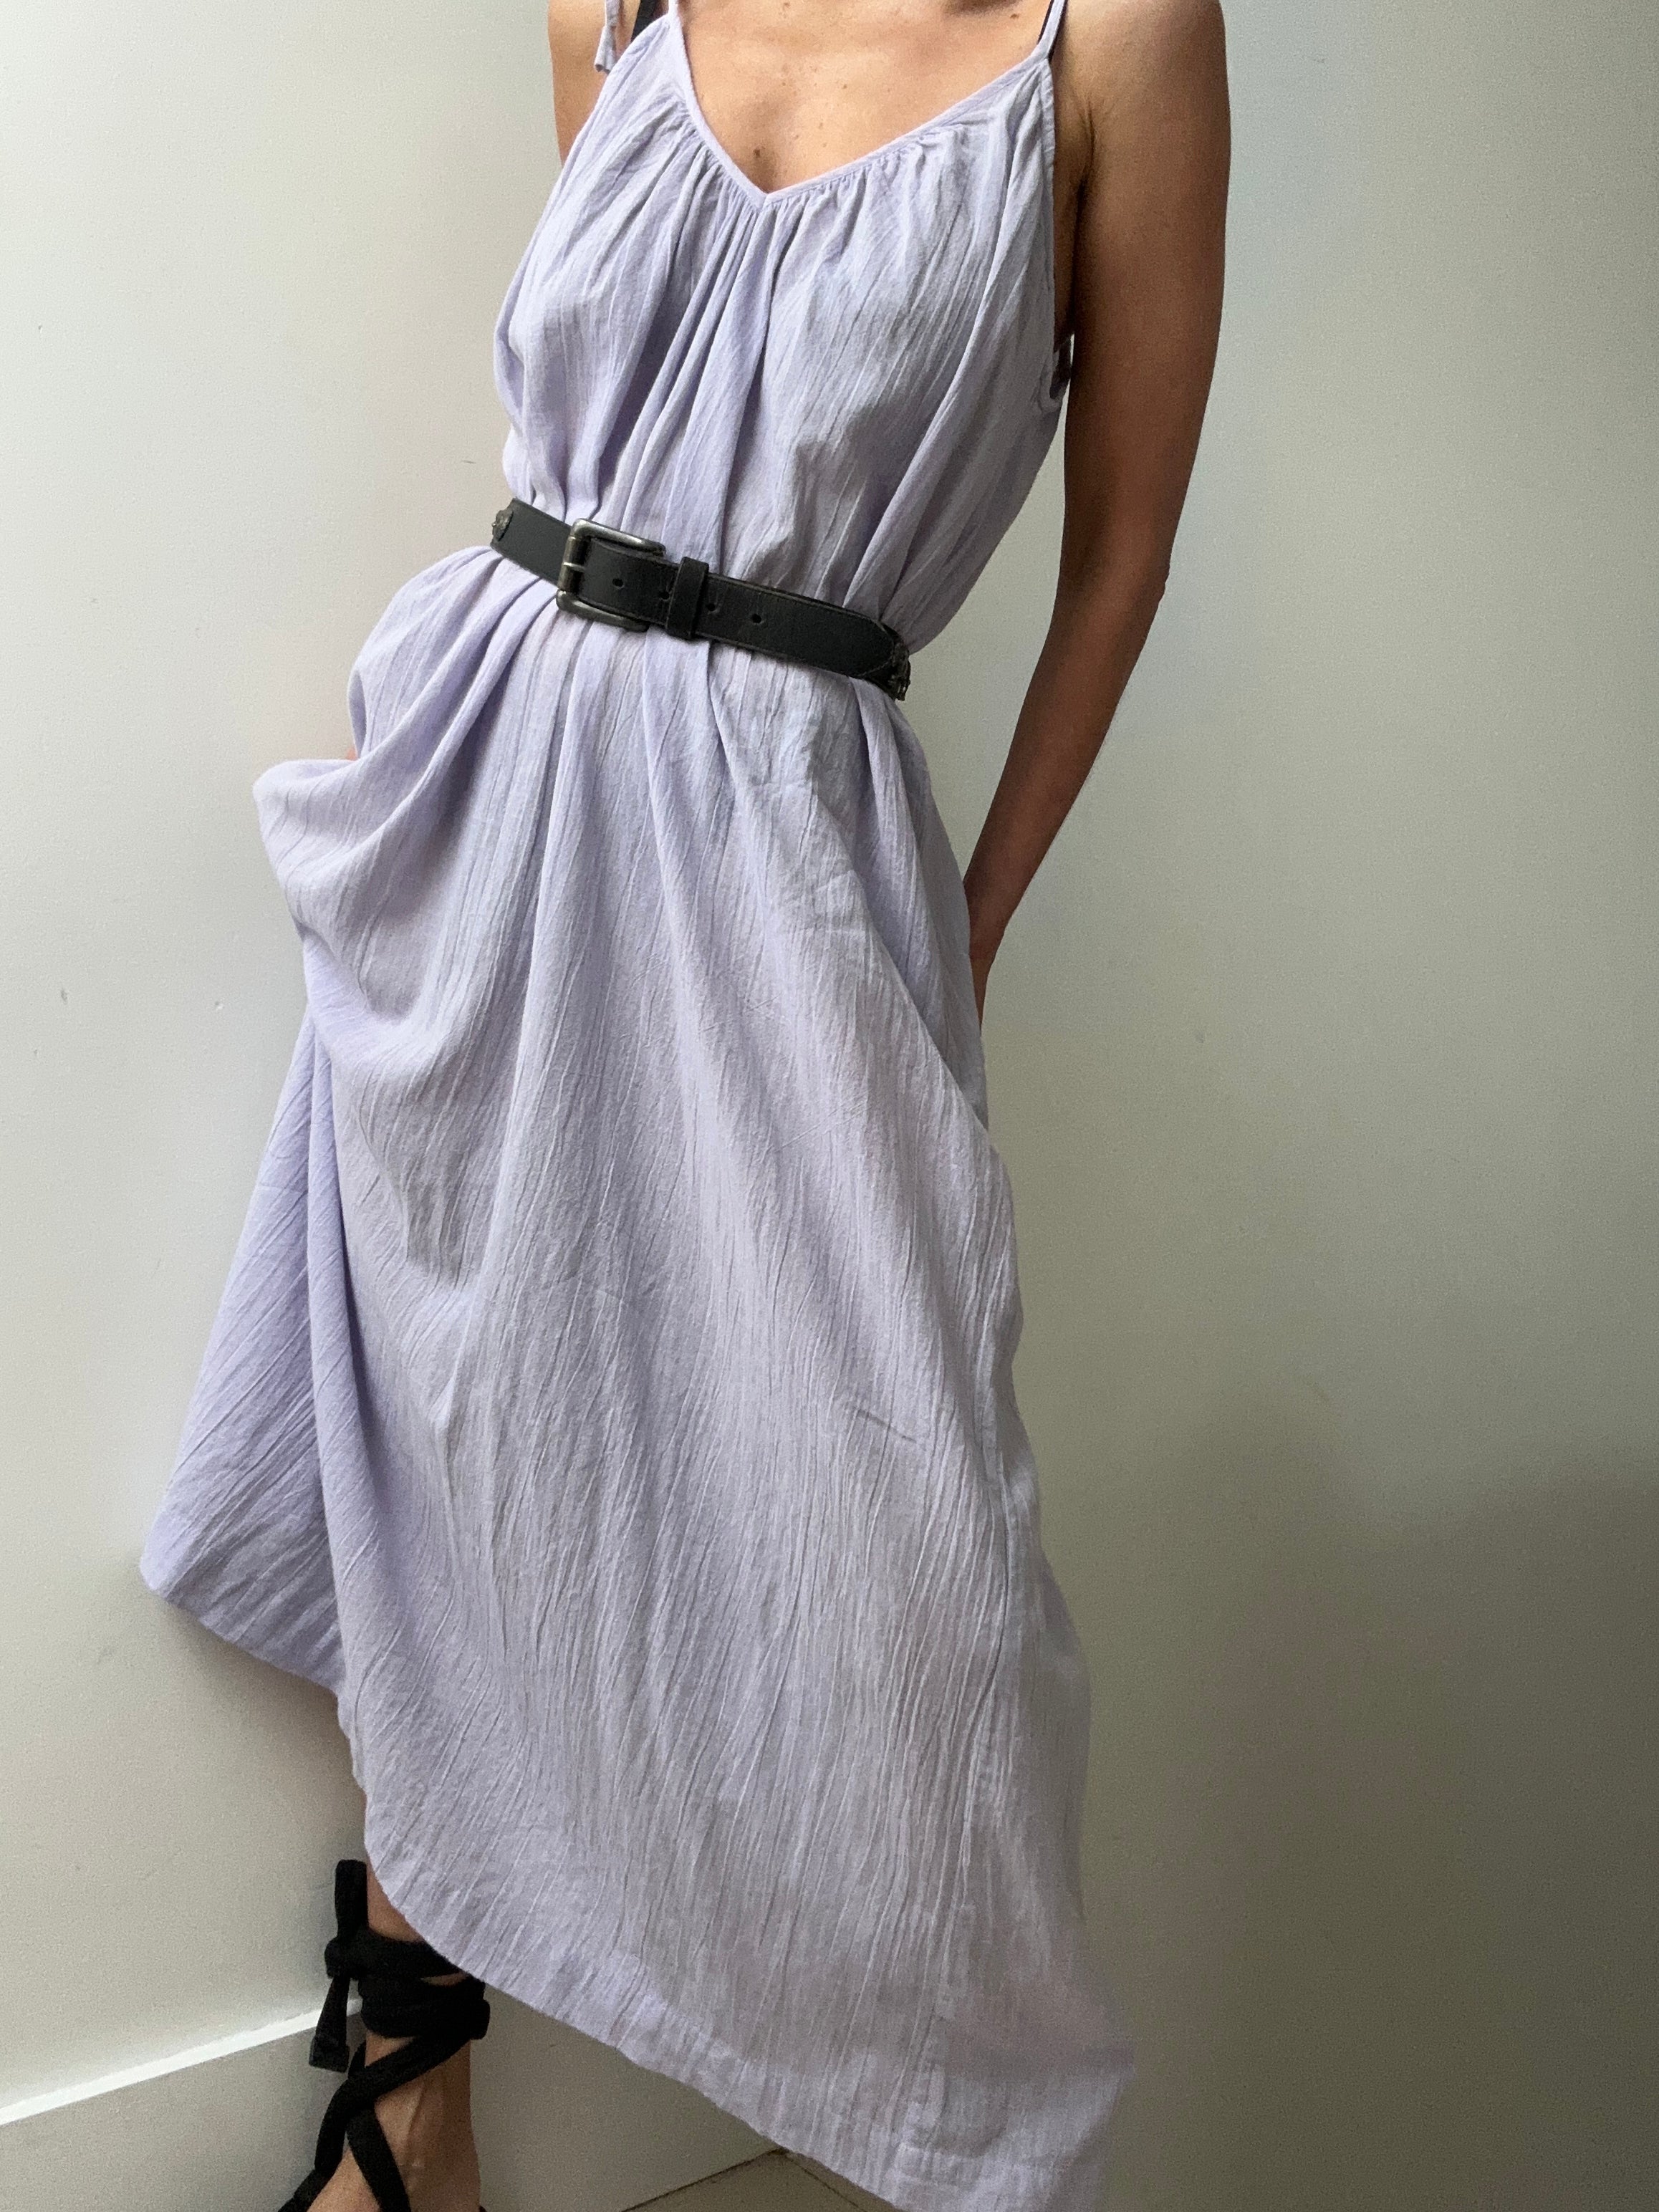 Jetsetbohemian Dresses One Size Tie Strap Cotton Dress in Lilac